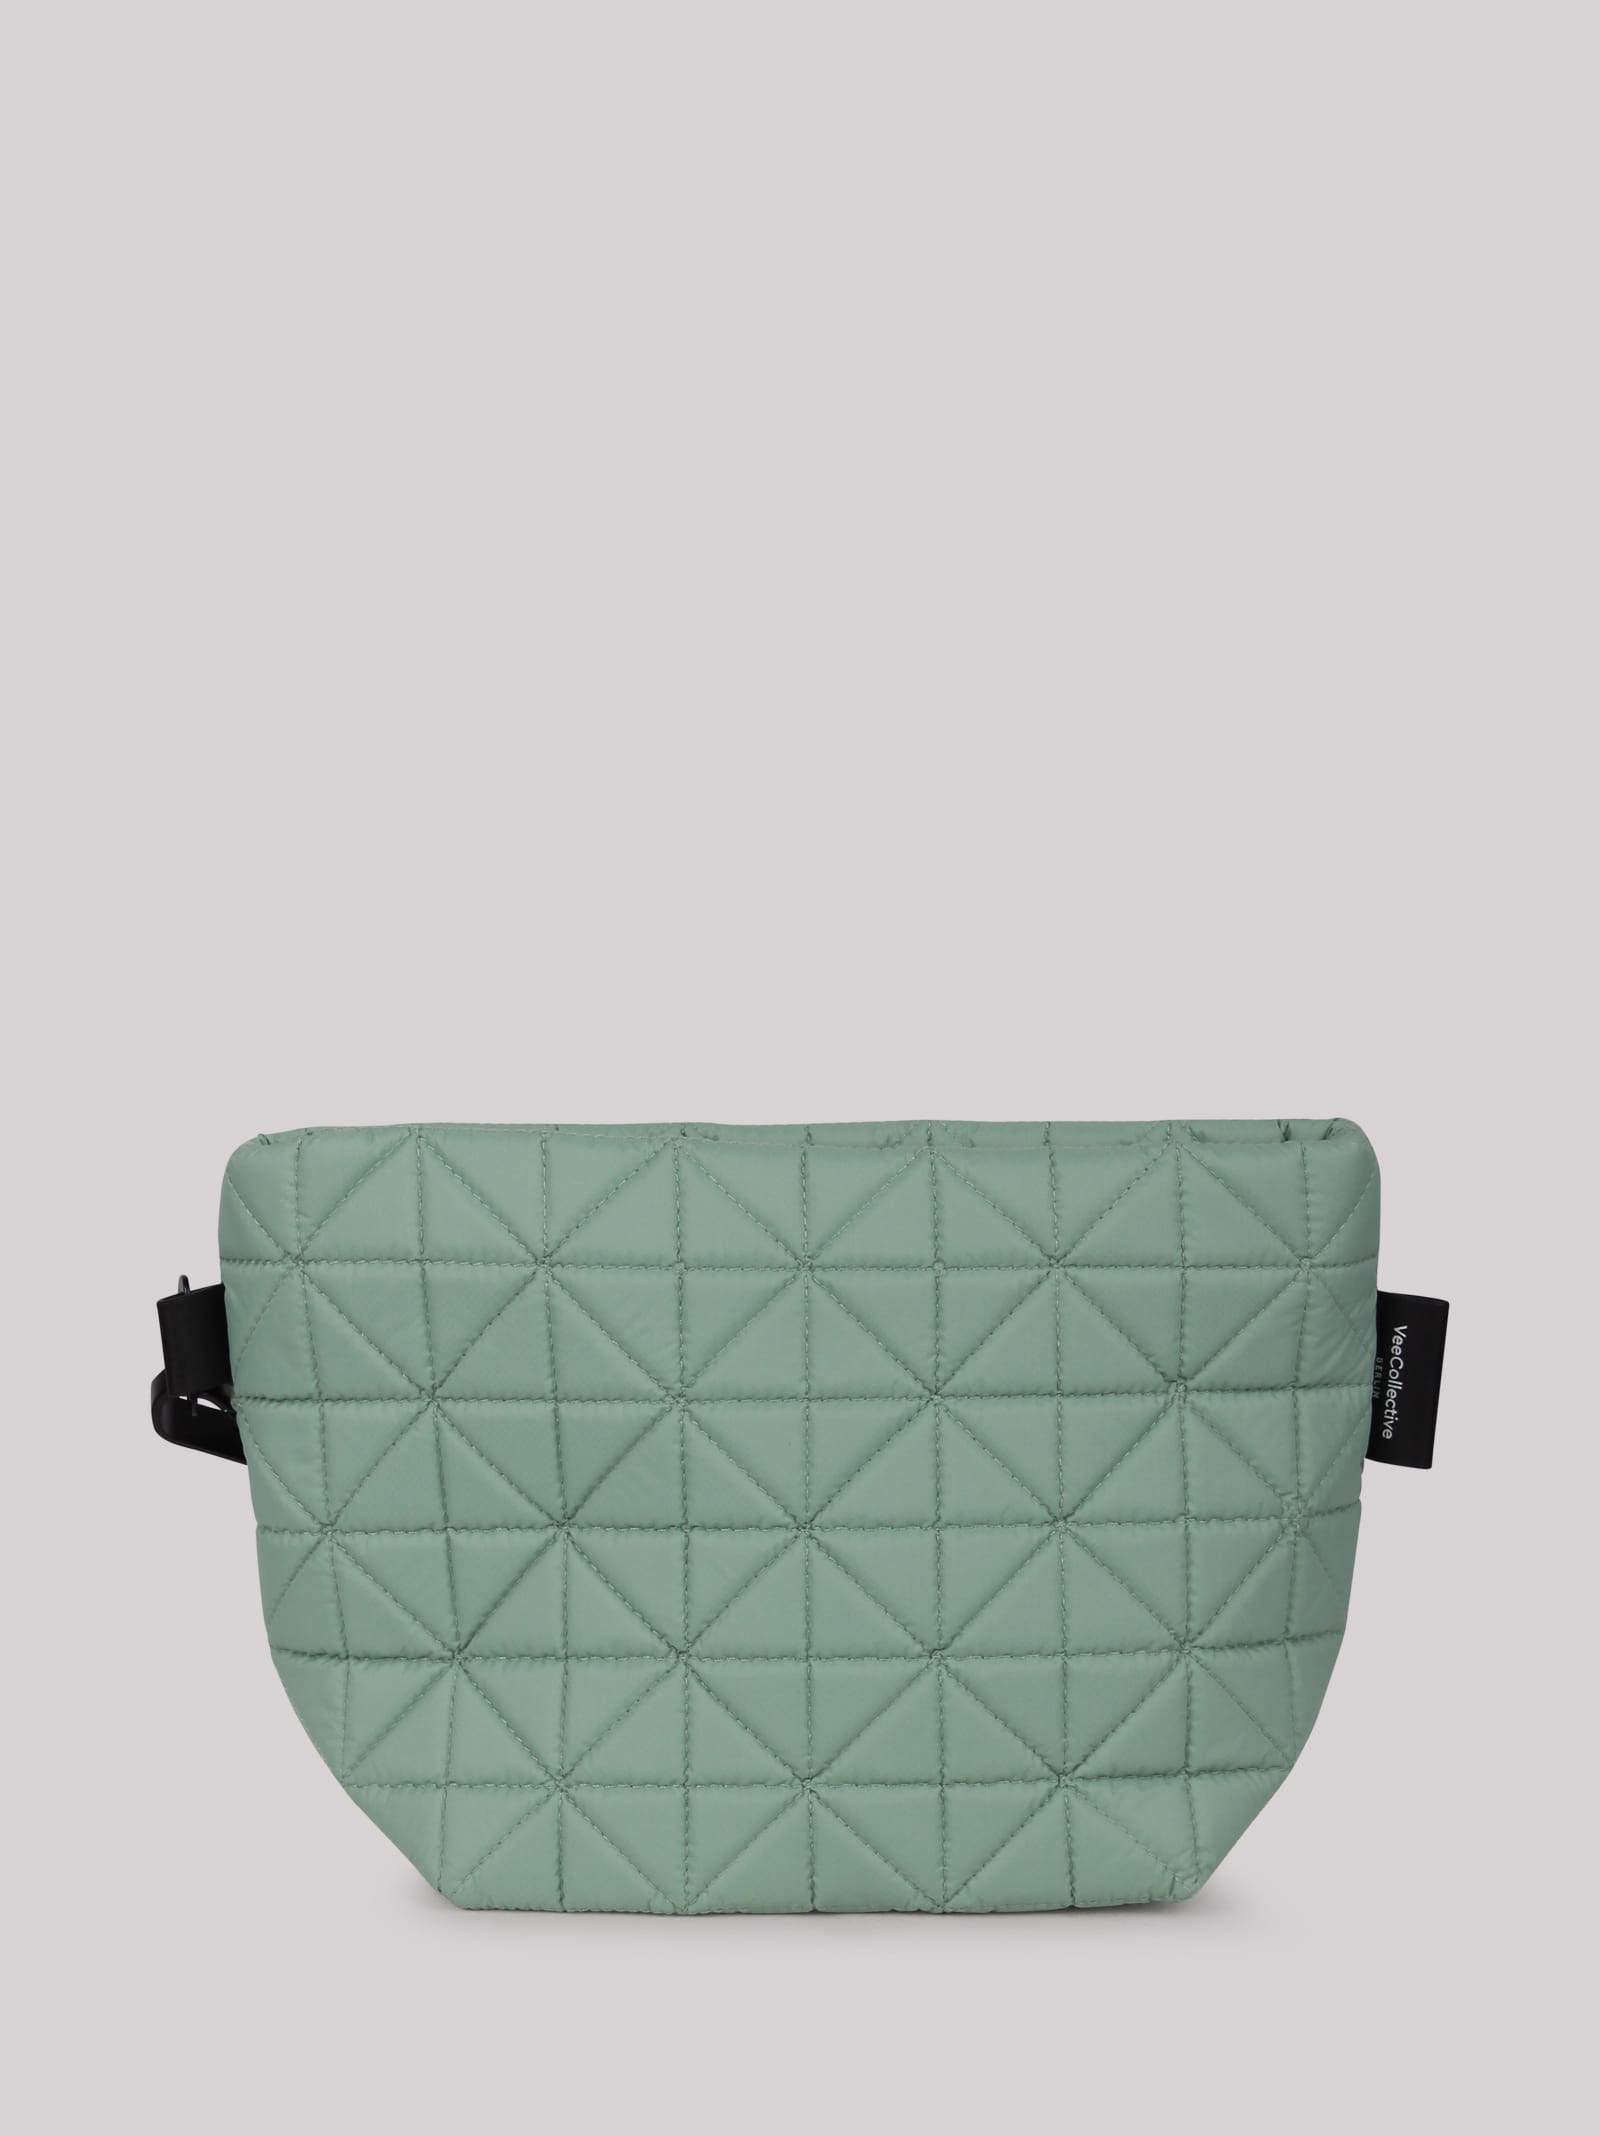 Shop Veecollective Vee Collective Padded Clutch